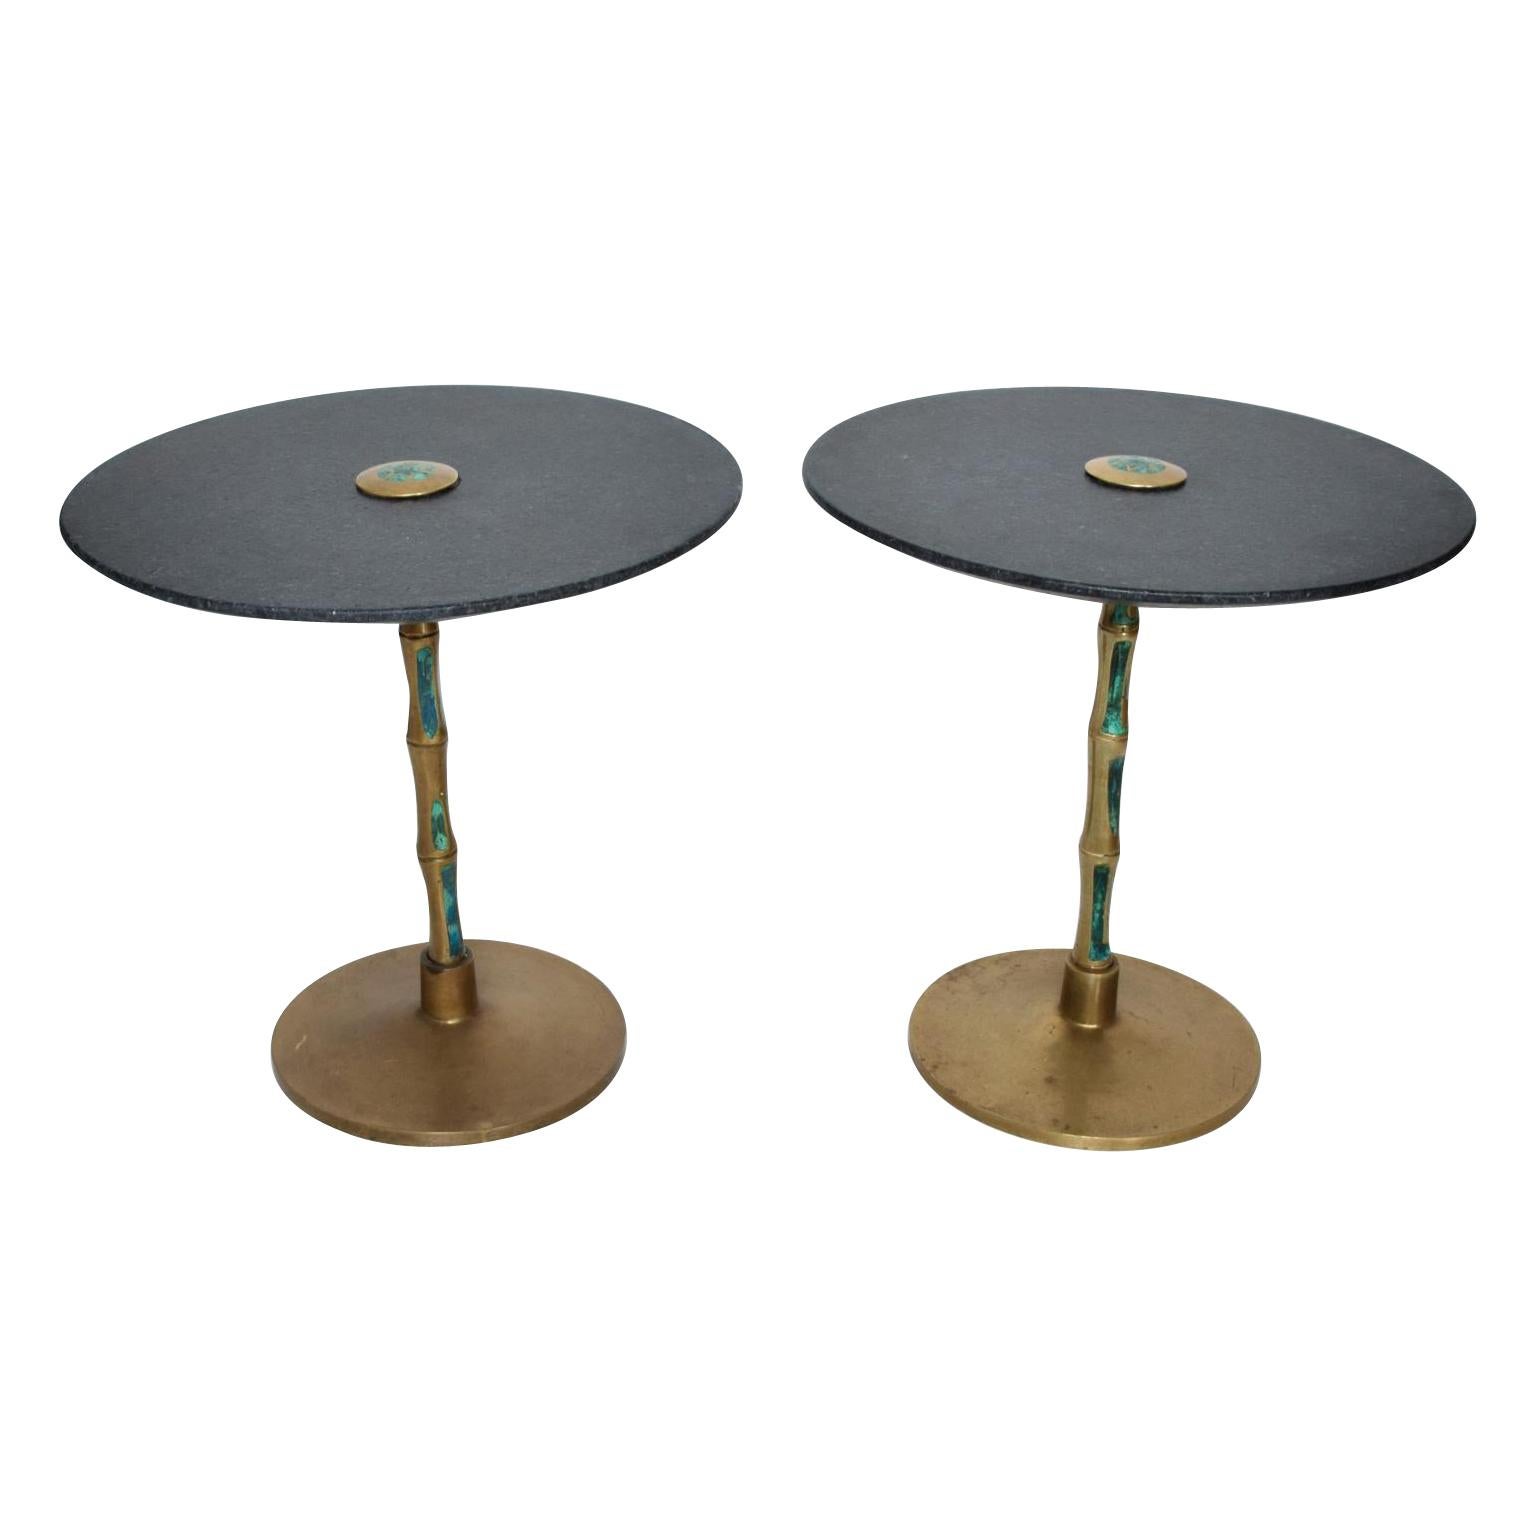 Pepe Mendoza, Pair of Side Tables, Midcentury Mexican Modernist